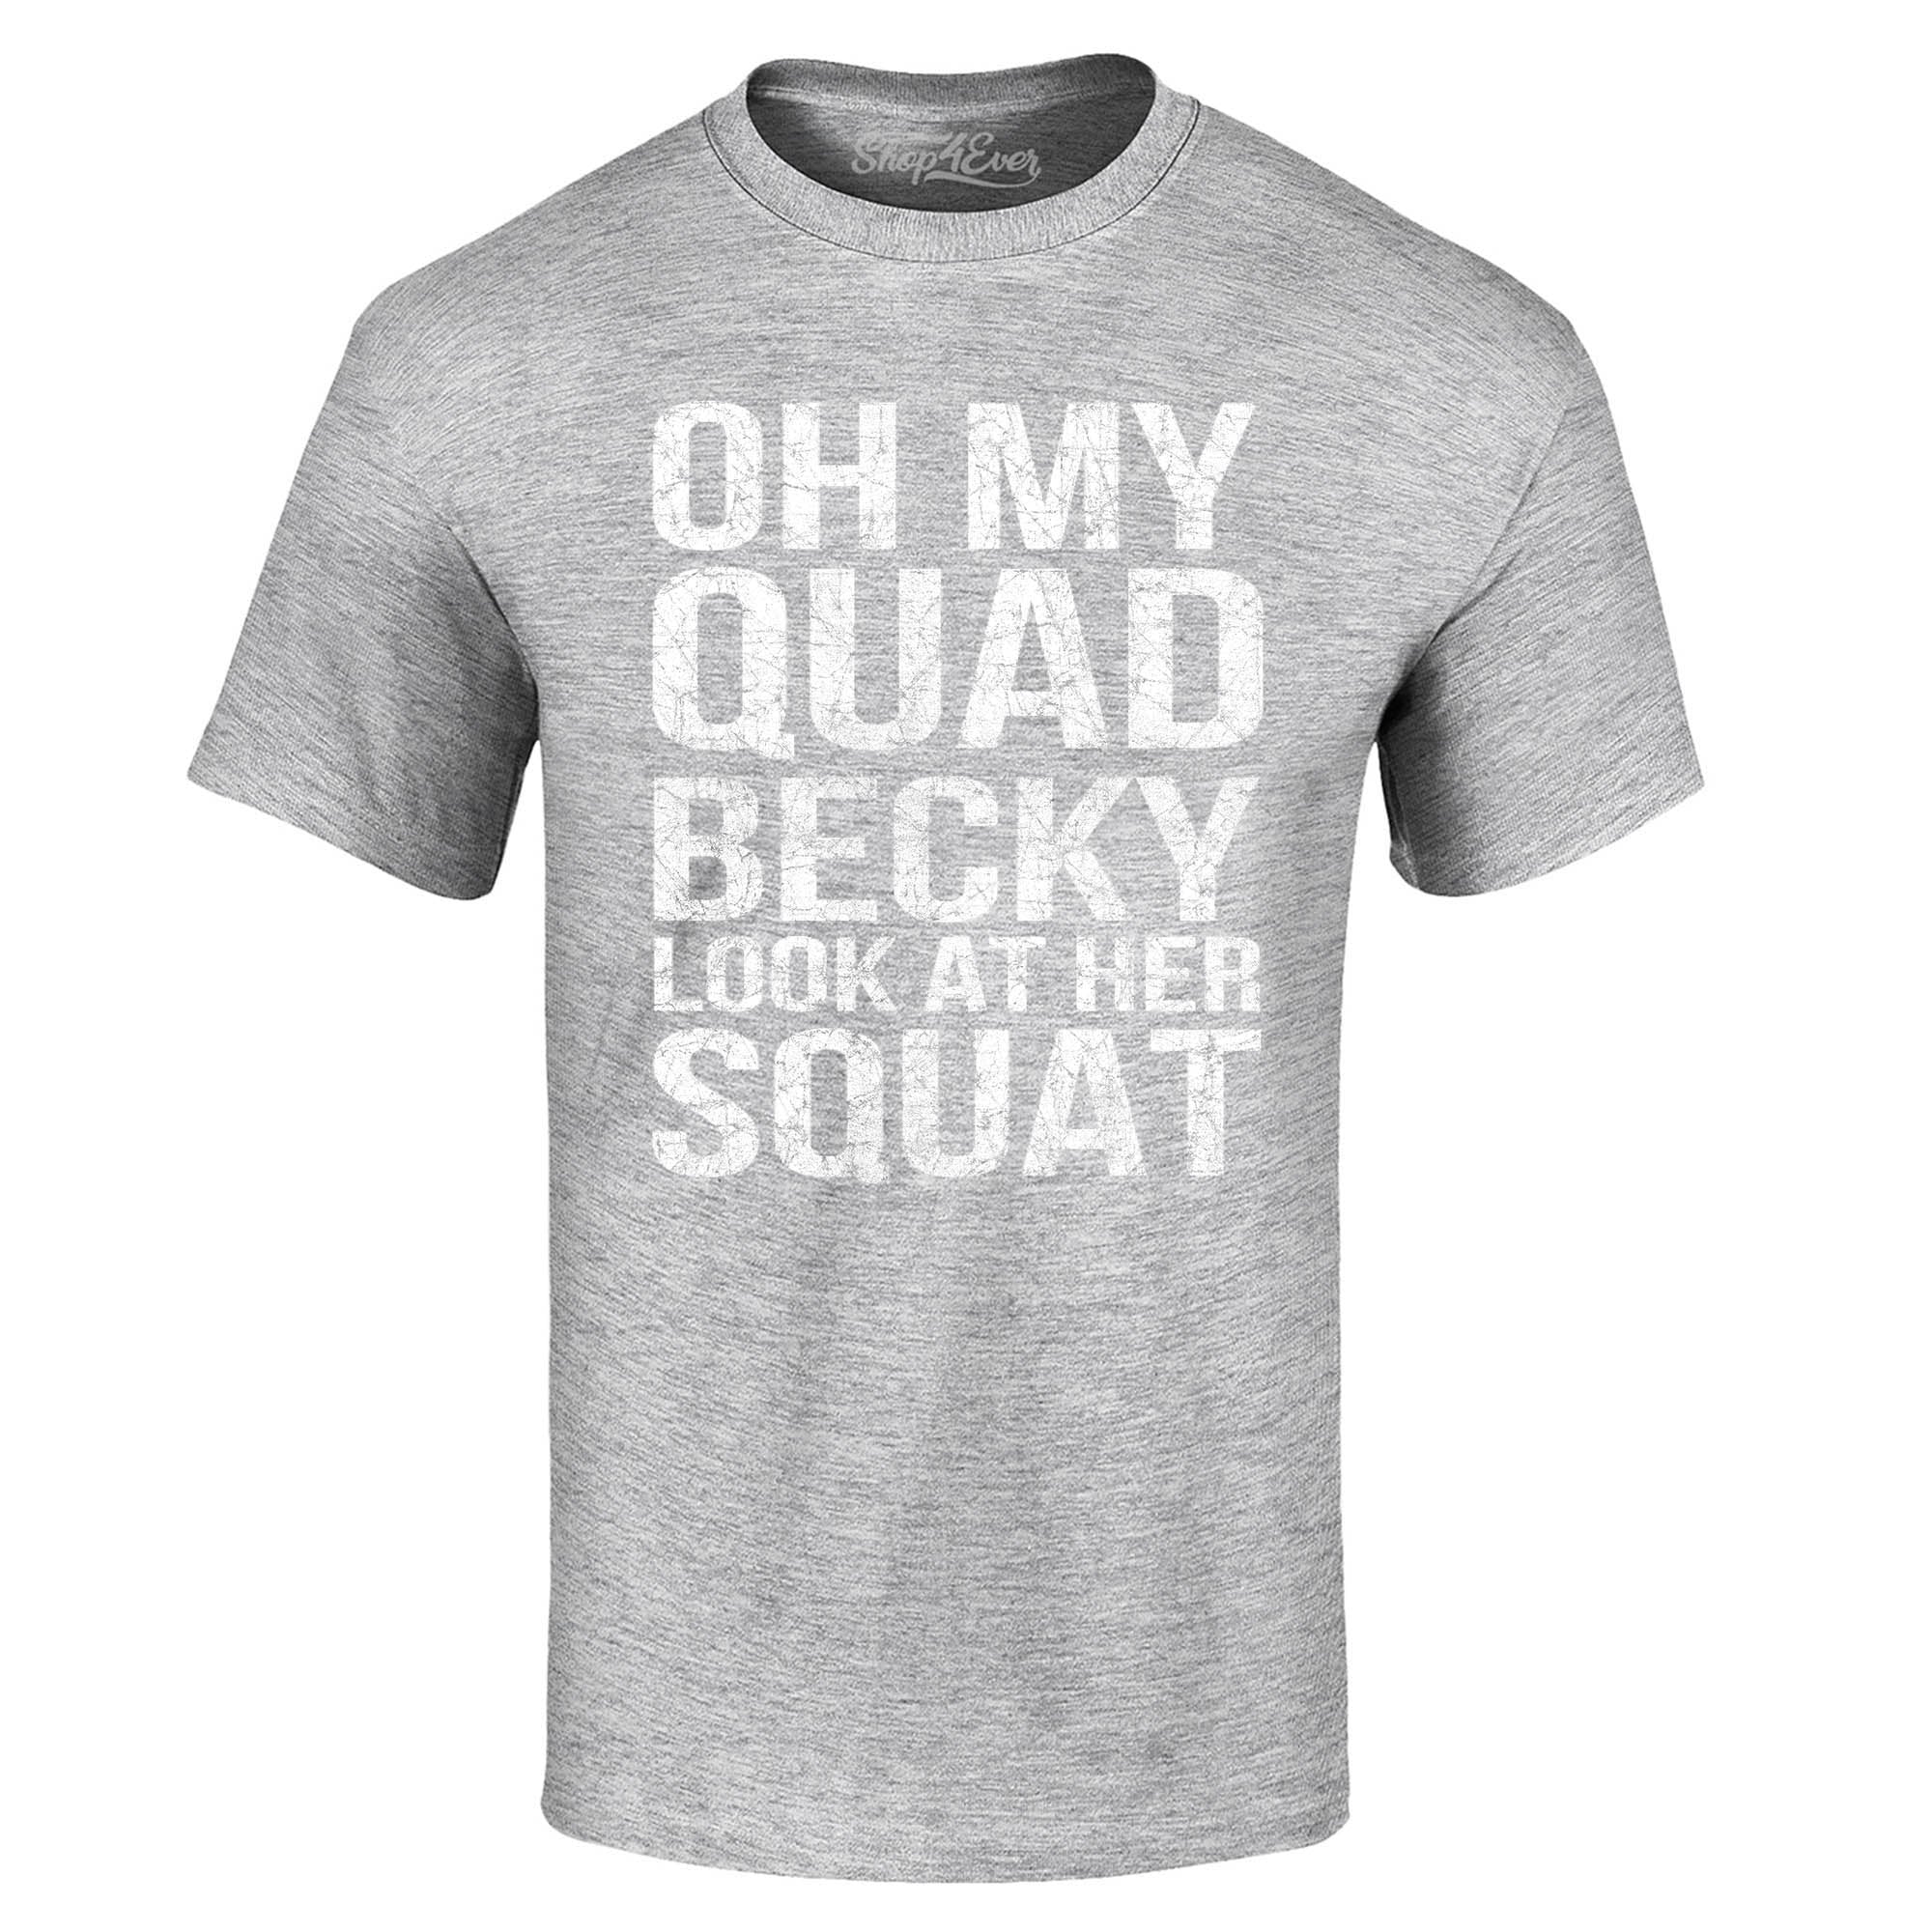 Oh My Quad Becky Look at Her Squat T-Shirt